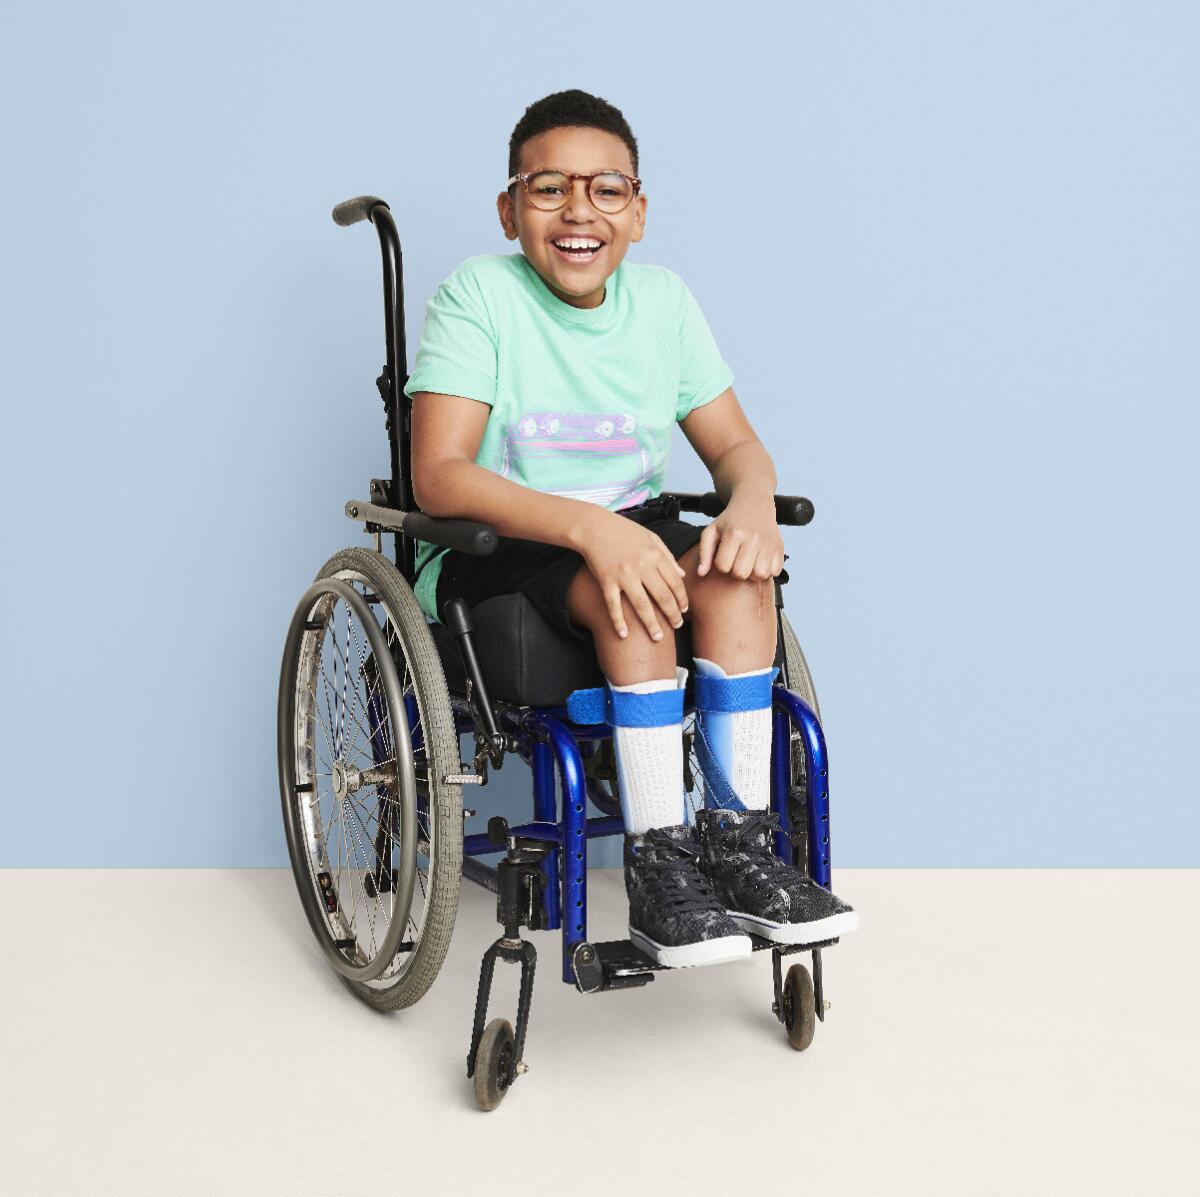 Our George adaptive clothing is making a difference!